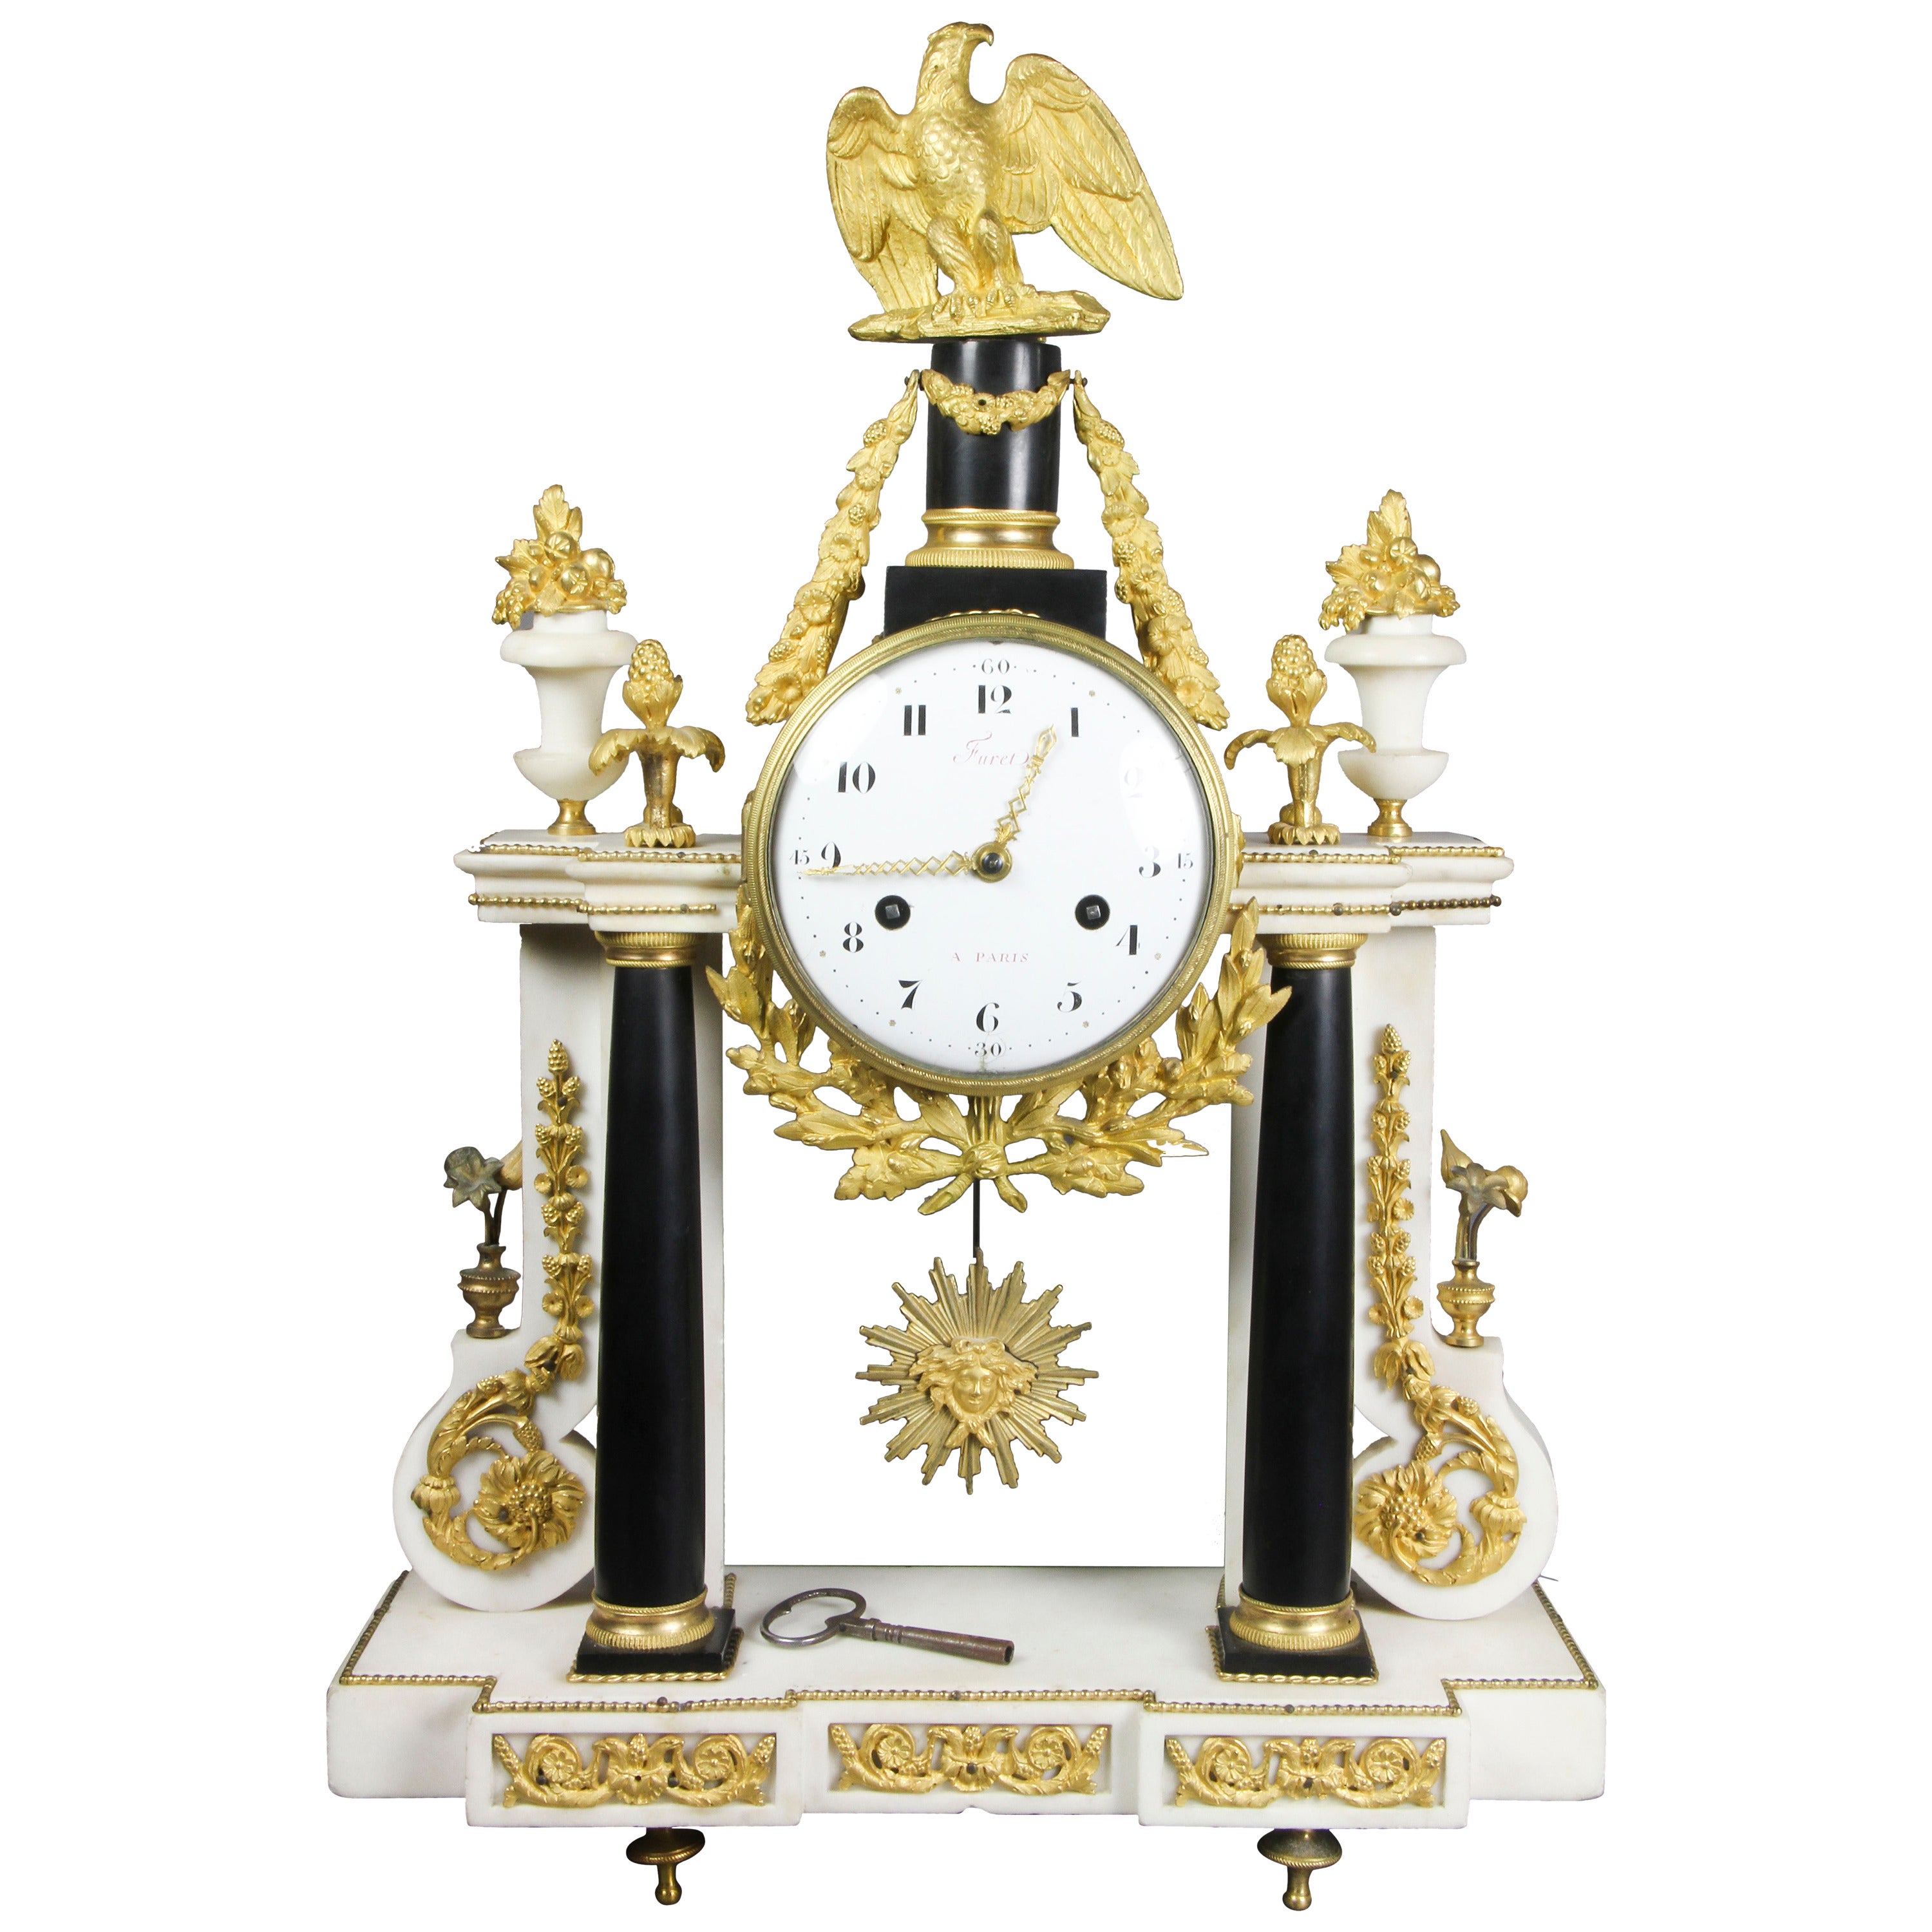 Late Louis XVI Ormolu-Mounted Black and White Marble Mantle Clock by Furet